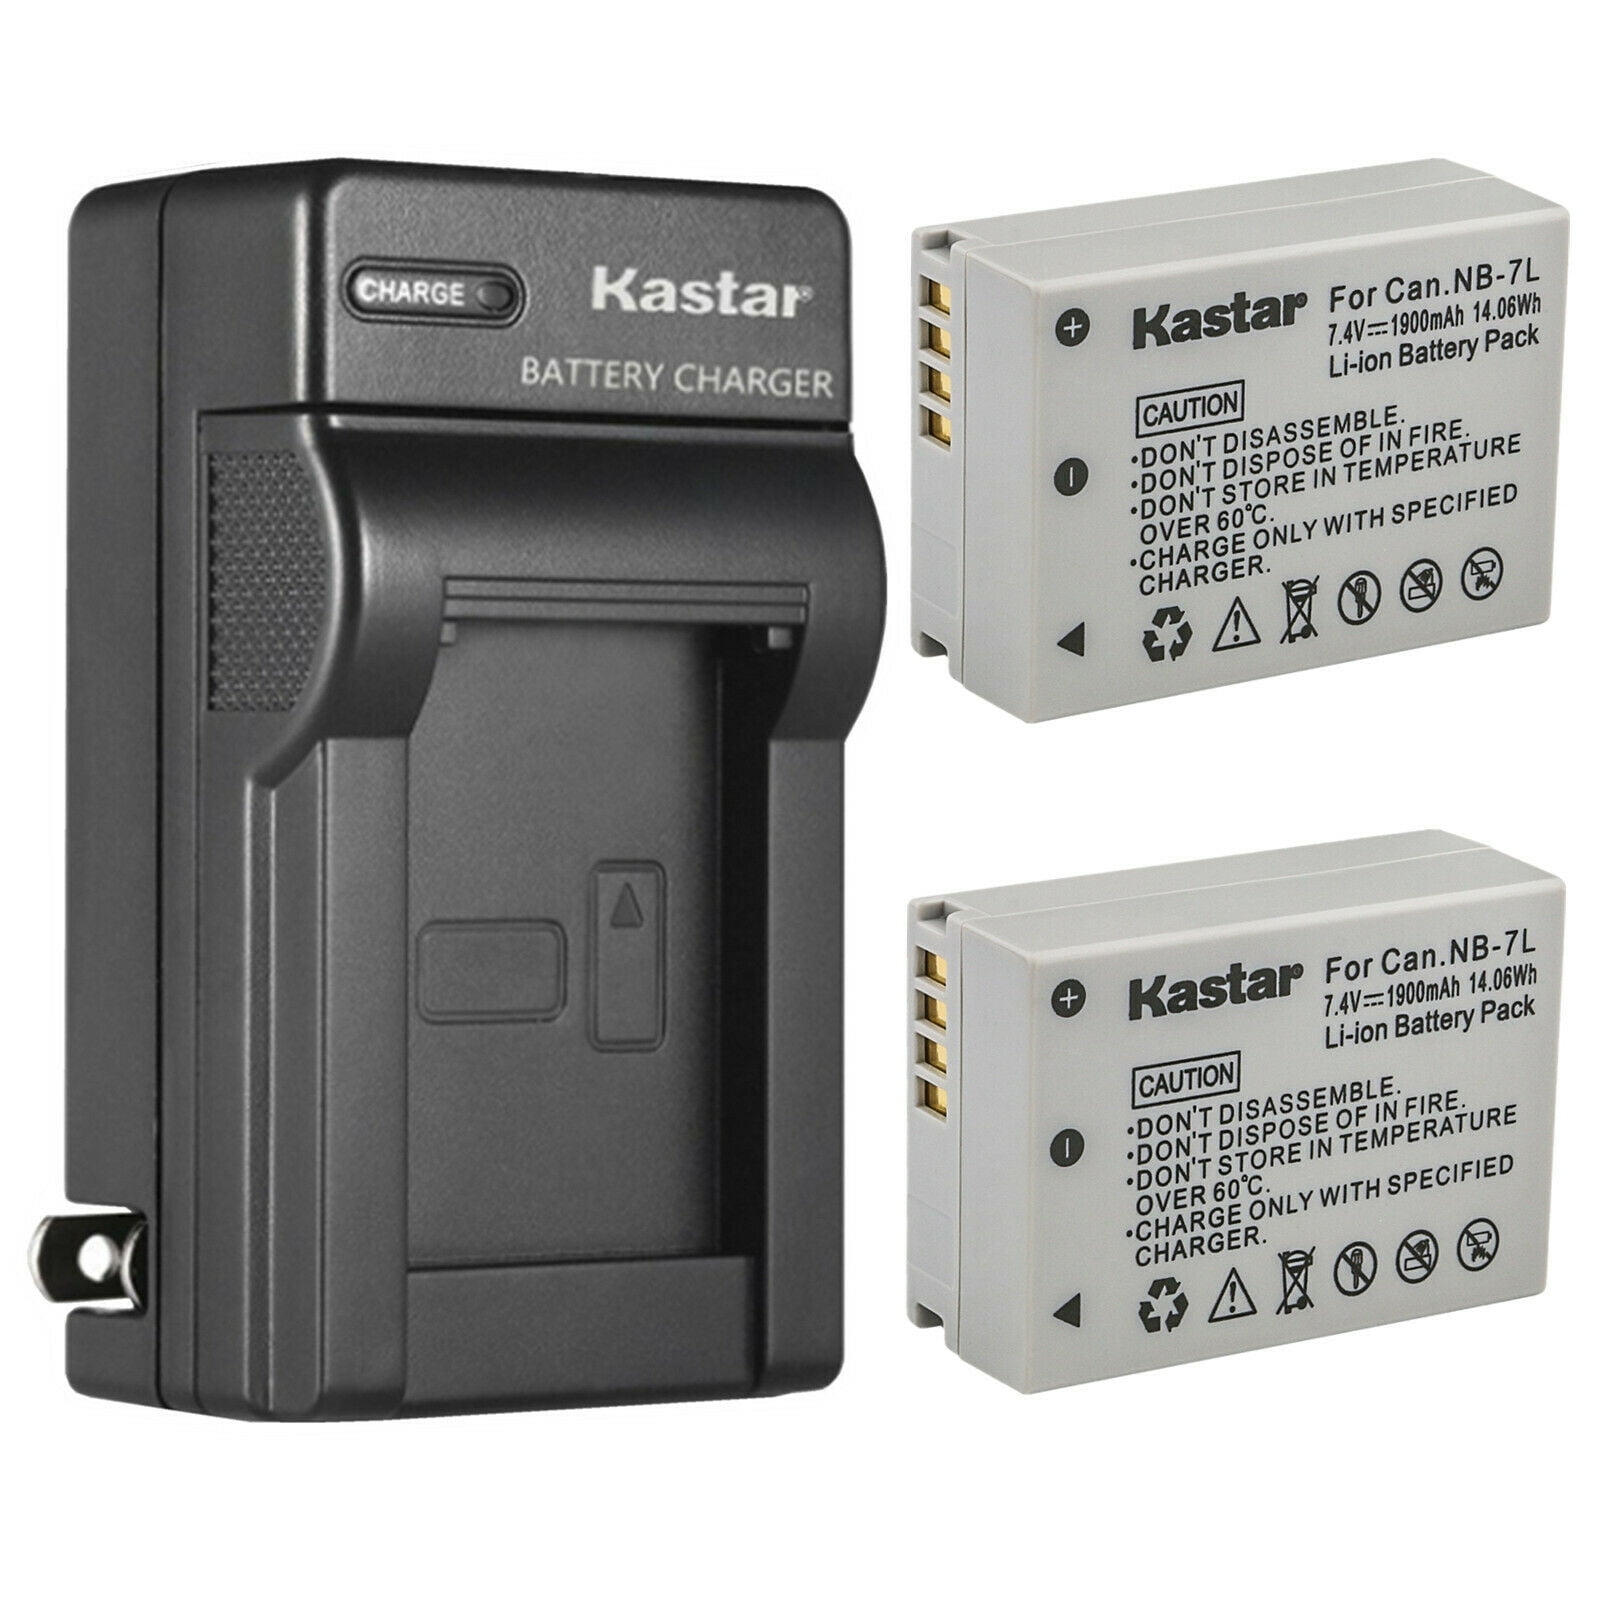 NB-7LH Battery Canon CB-2LZ CB-2LZE Charger PowerShot G12 PowerShot SX30IS Camera Canon PowerShot G11 PowerShot SX30 is Kastar 2-Pack Battery and AC Wall Charger Replacement for Canon NB-7L